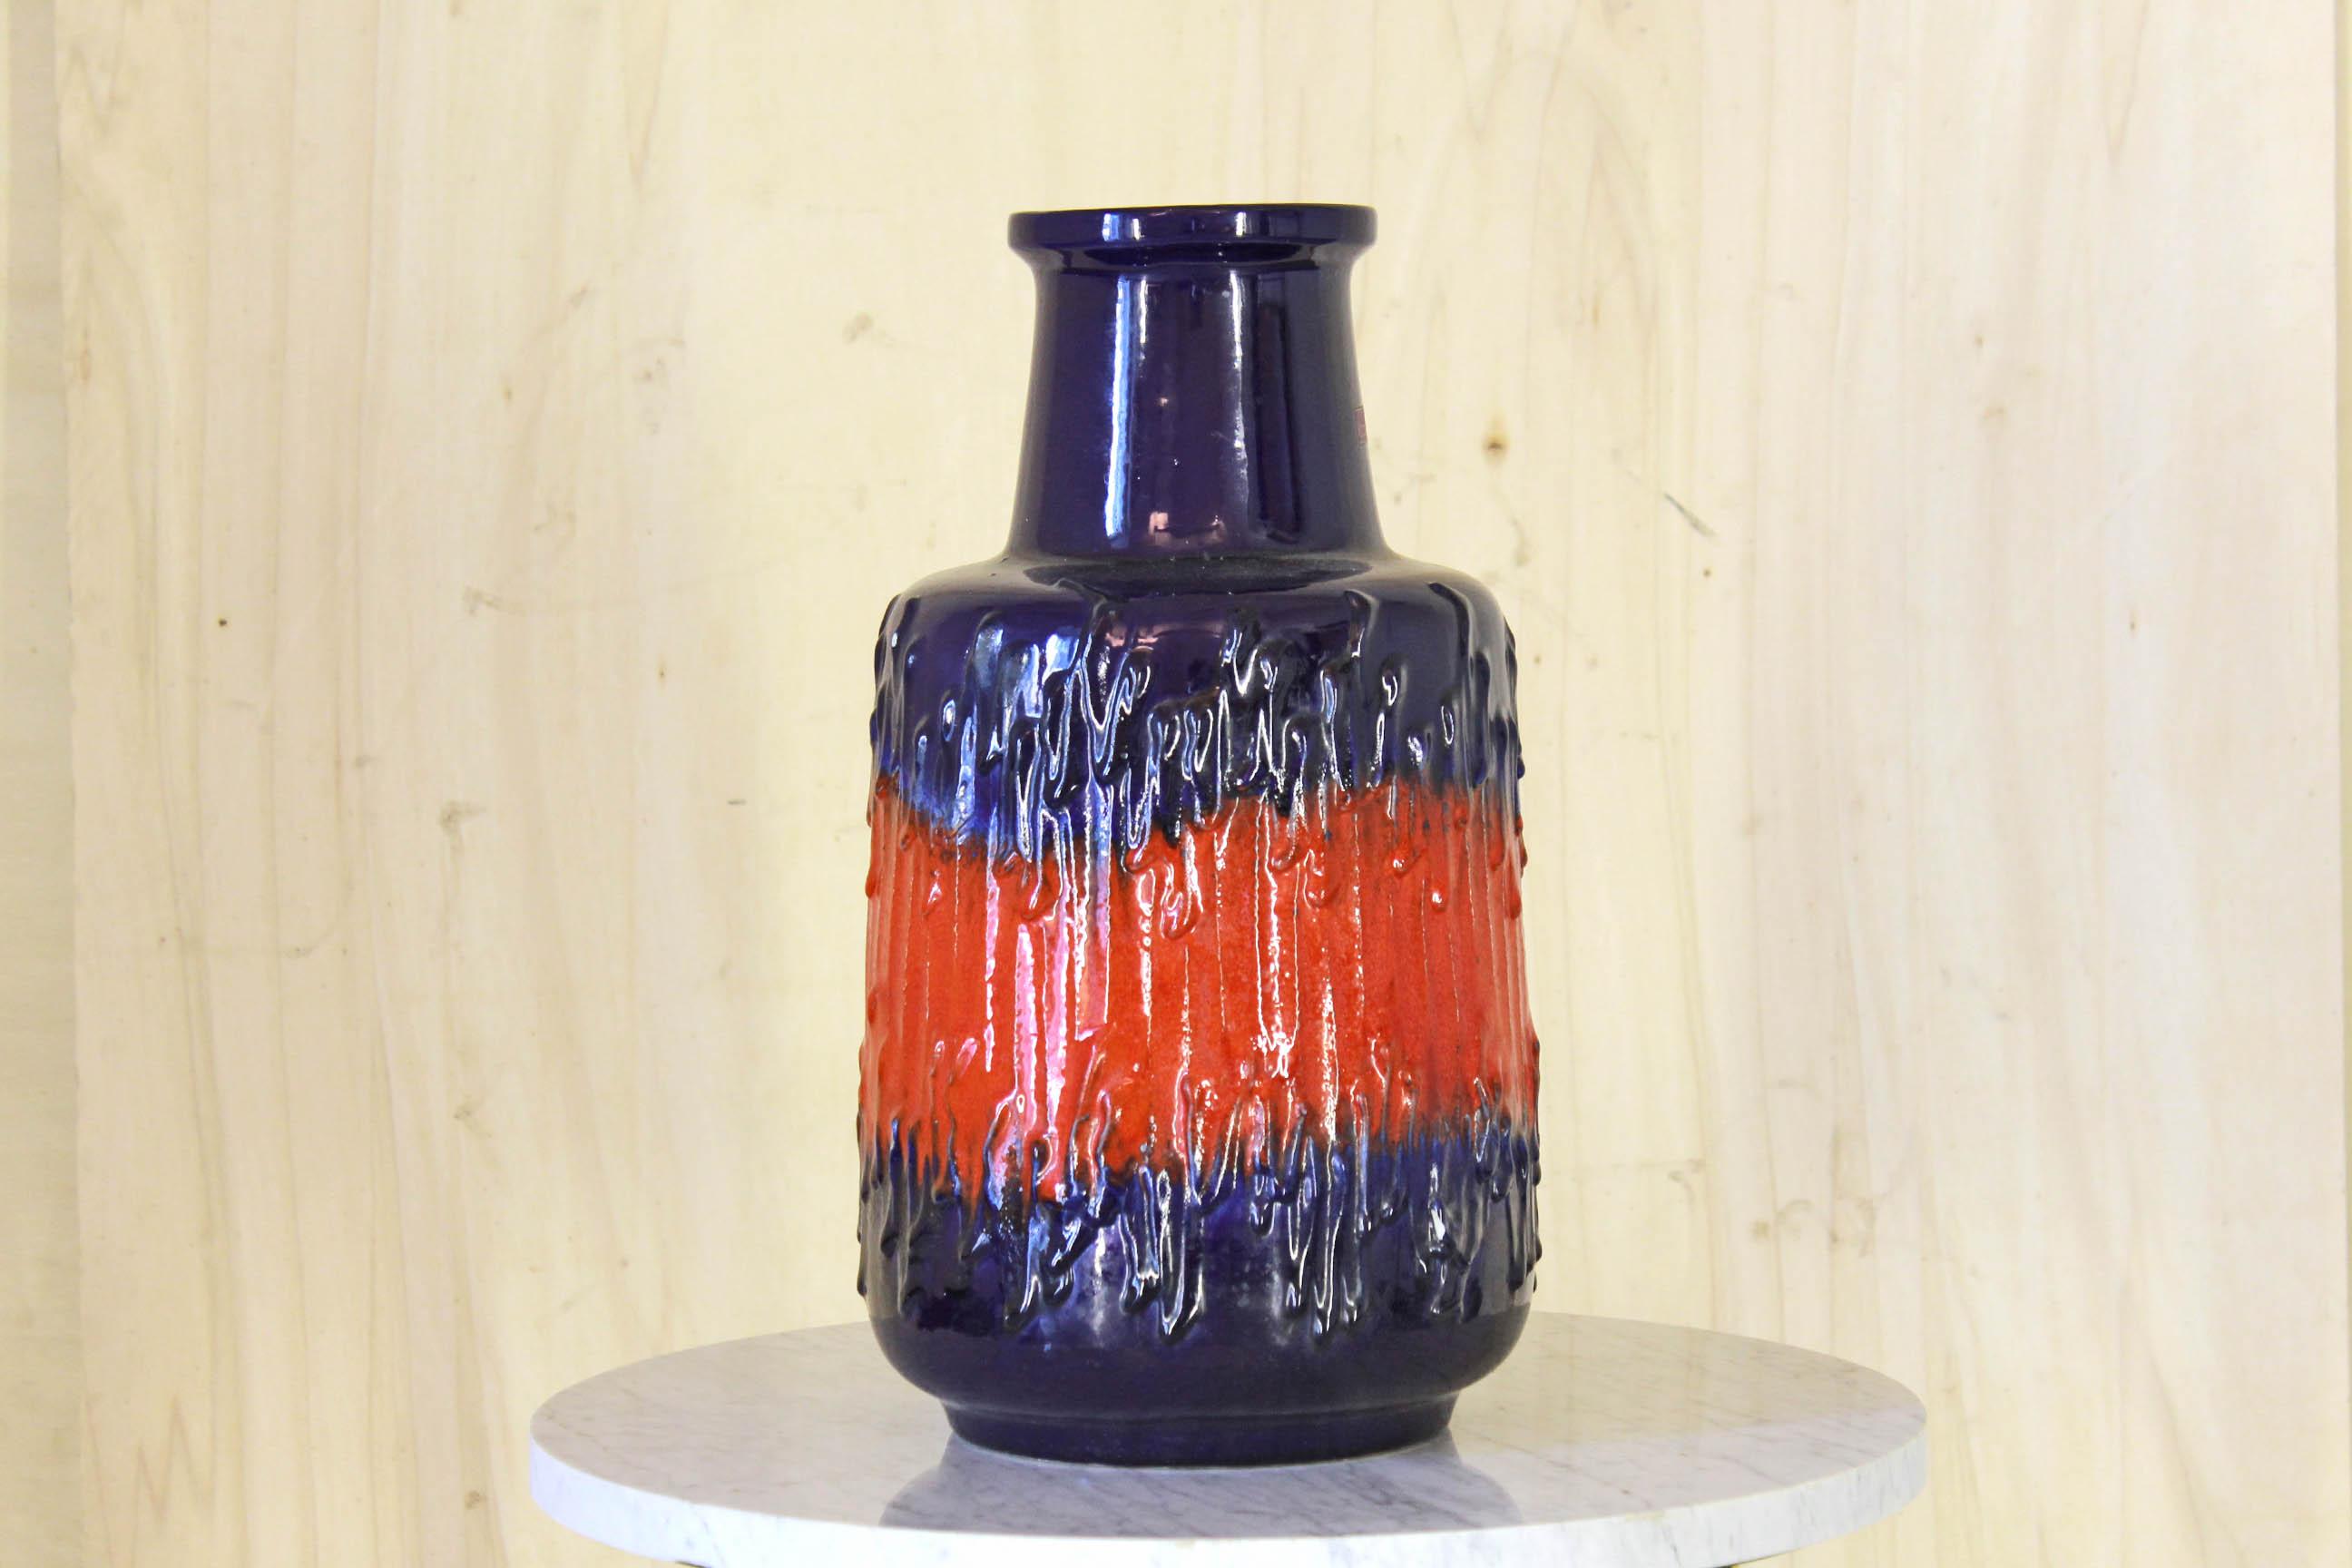 German Vintage Decorative Ceramic Blue and Red Vase from Scheurich Firm, 1960s